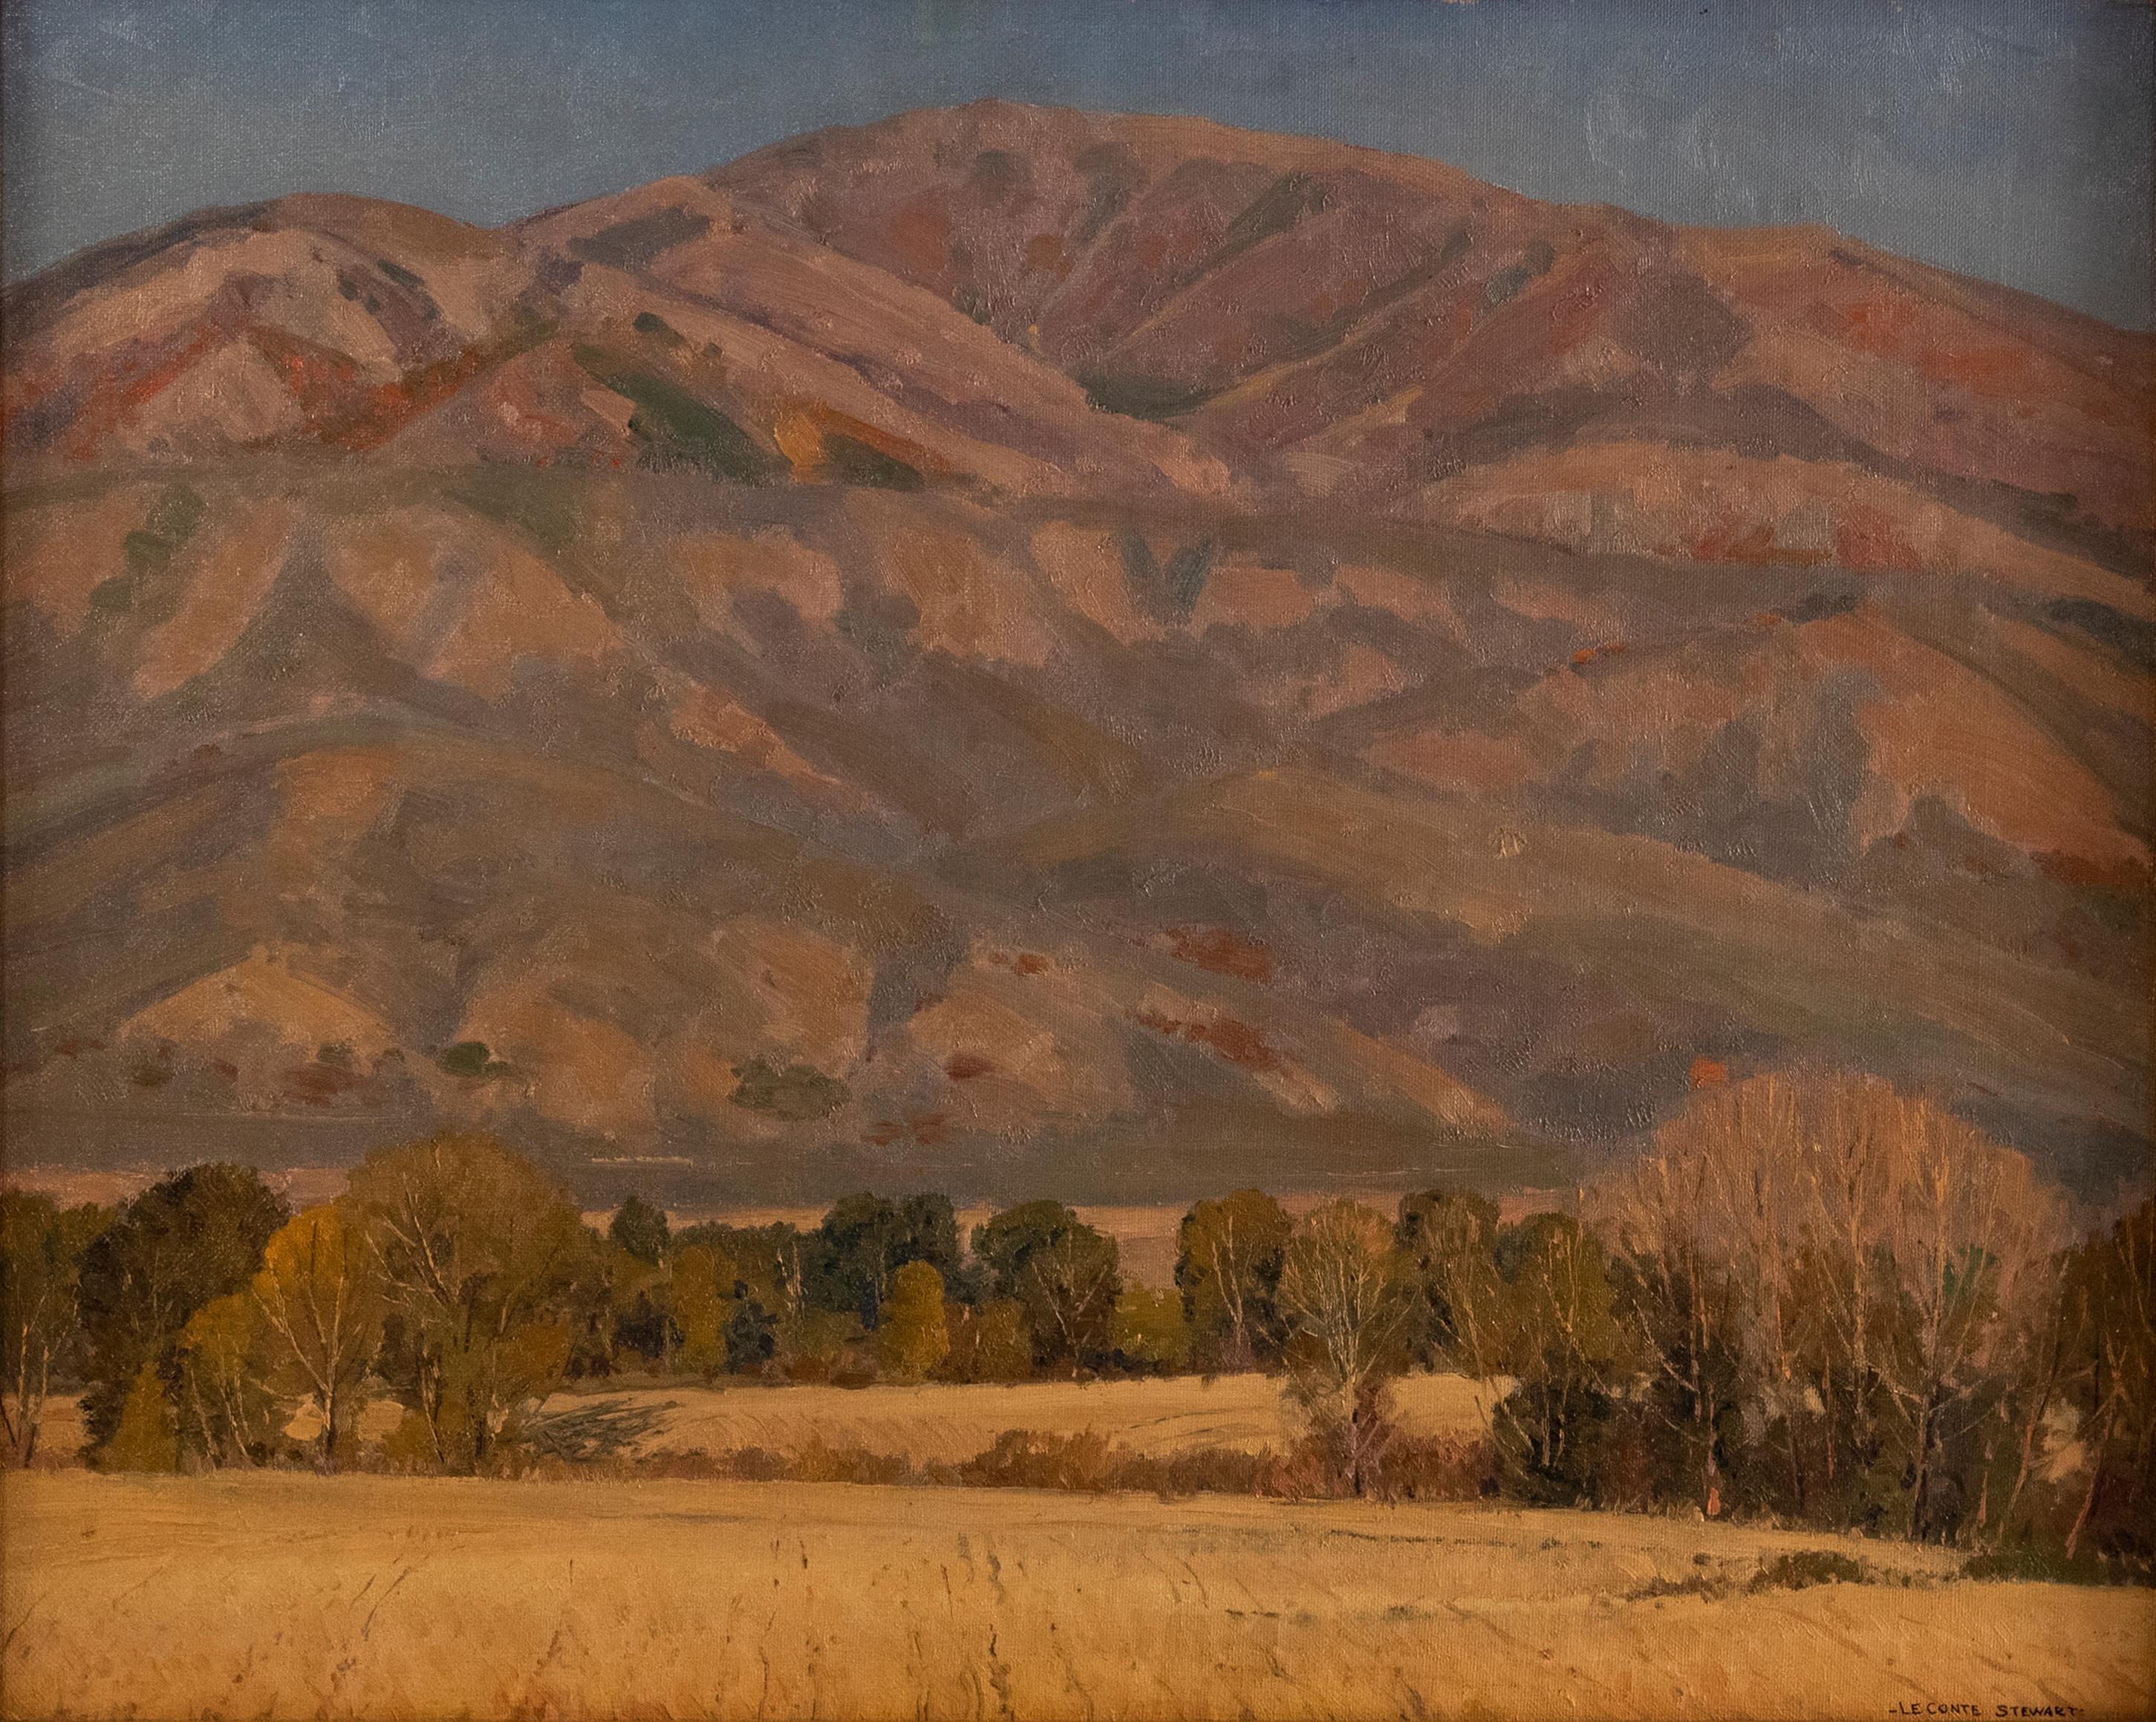 24 x 30 in. 

From a private Salt Lake City collection.

LeConte Stewart's prolific career was near its peak in 1940 when he produced iconic, masterful landscapes of the Northern Utah valleys, often featuring houses, barns, and mills. Many of these